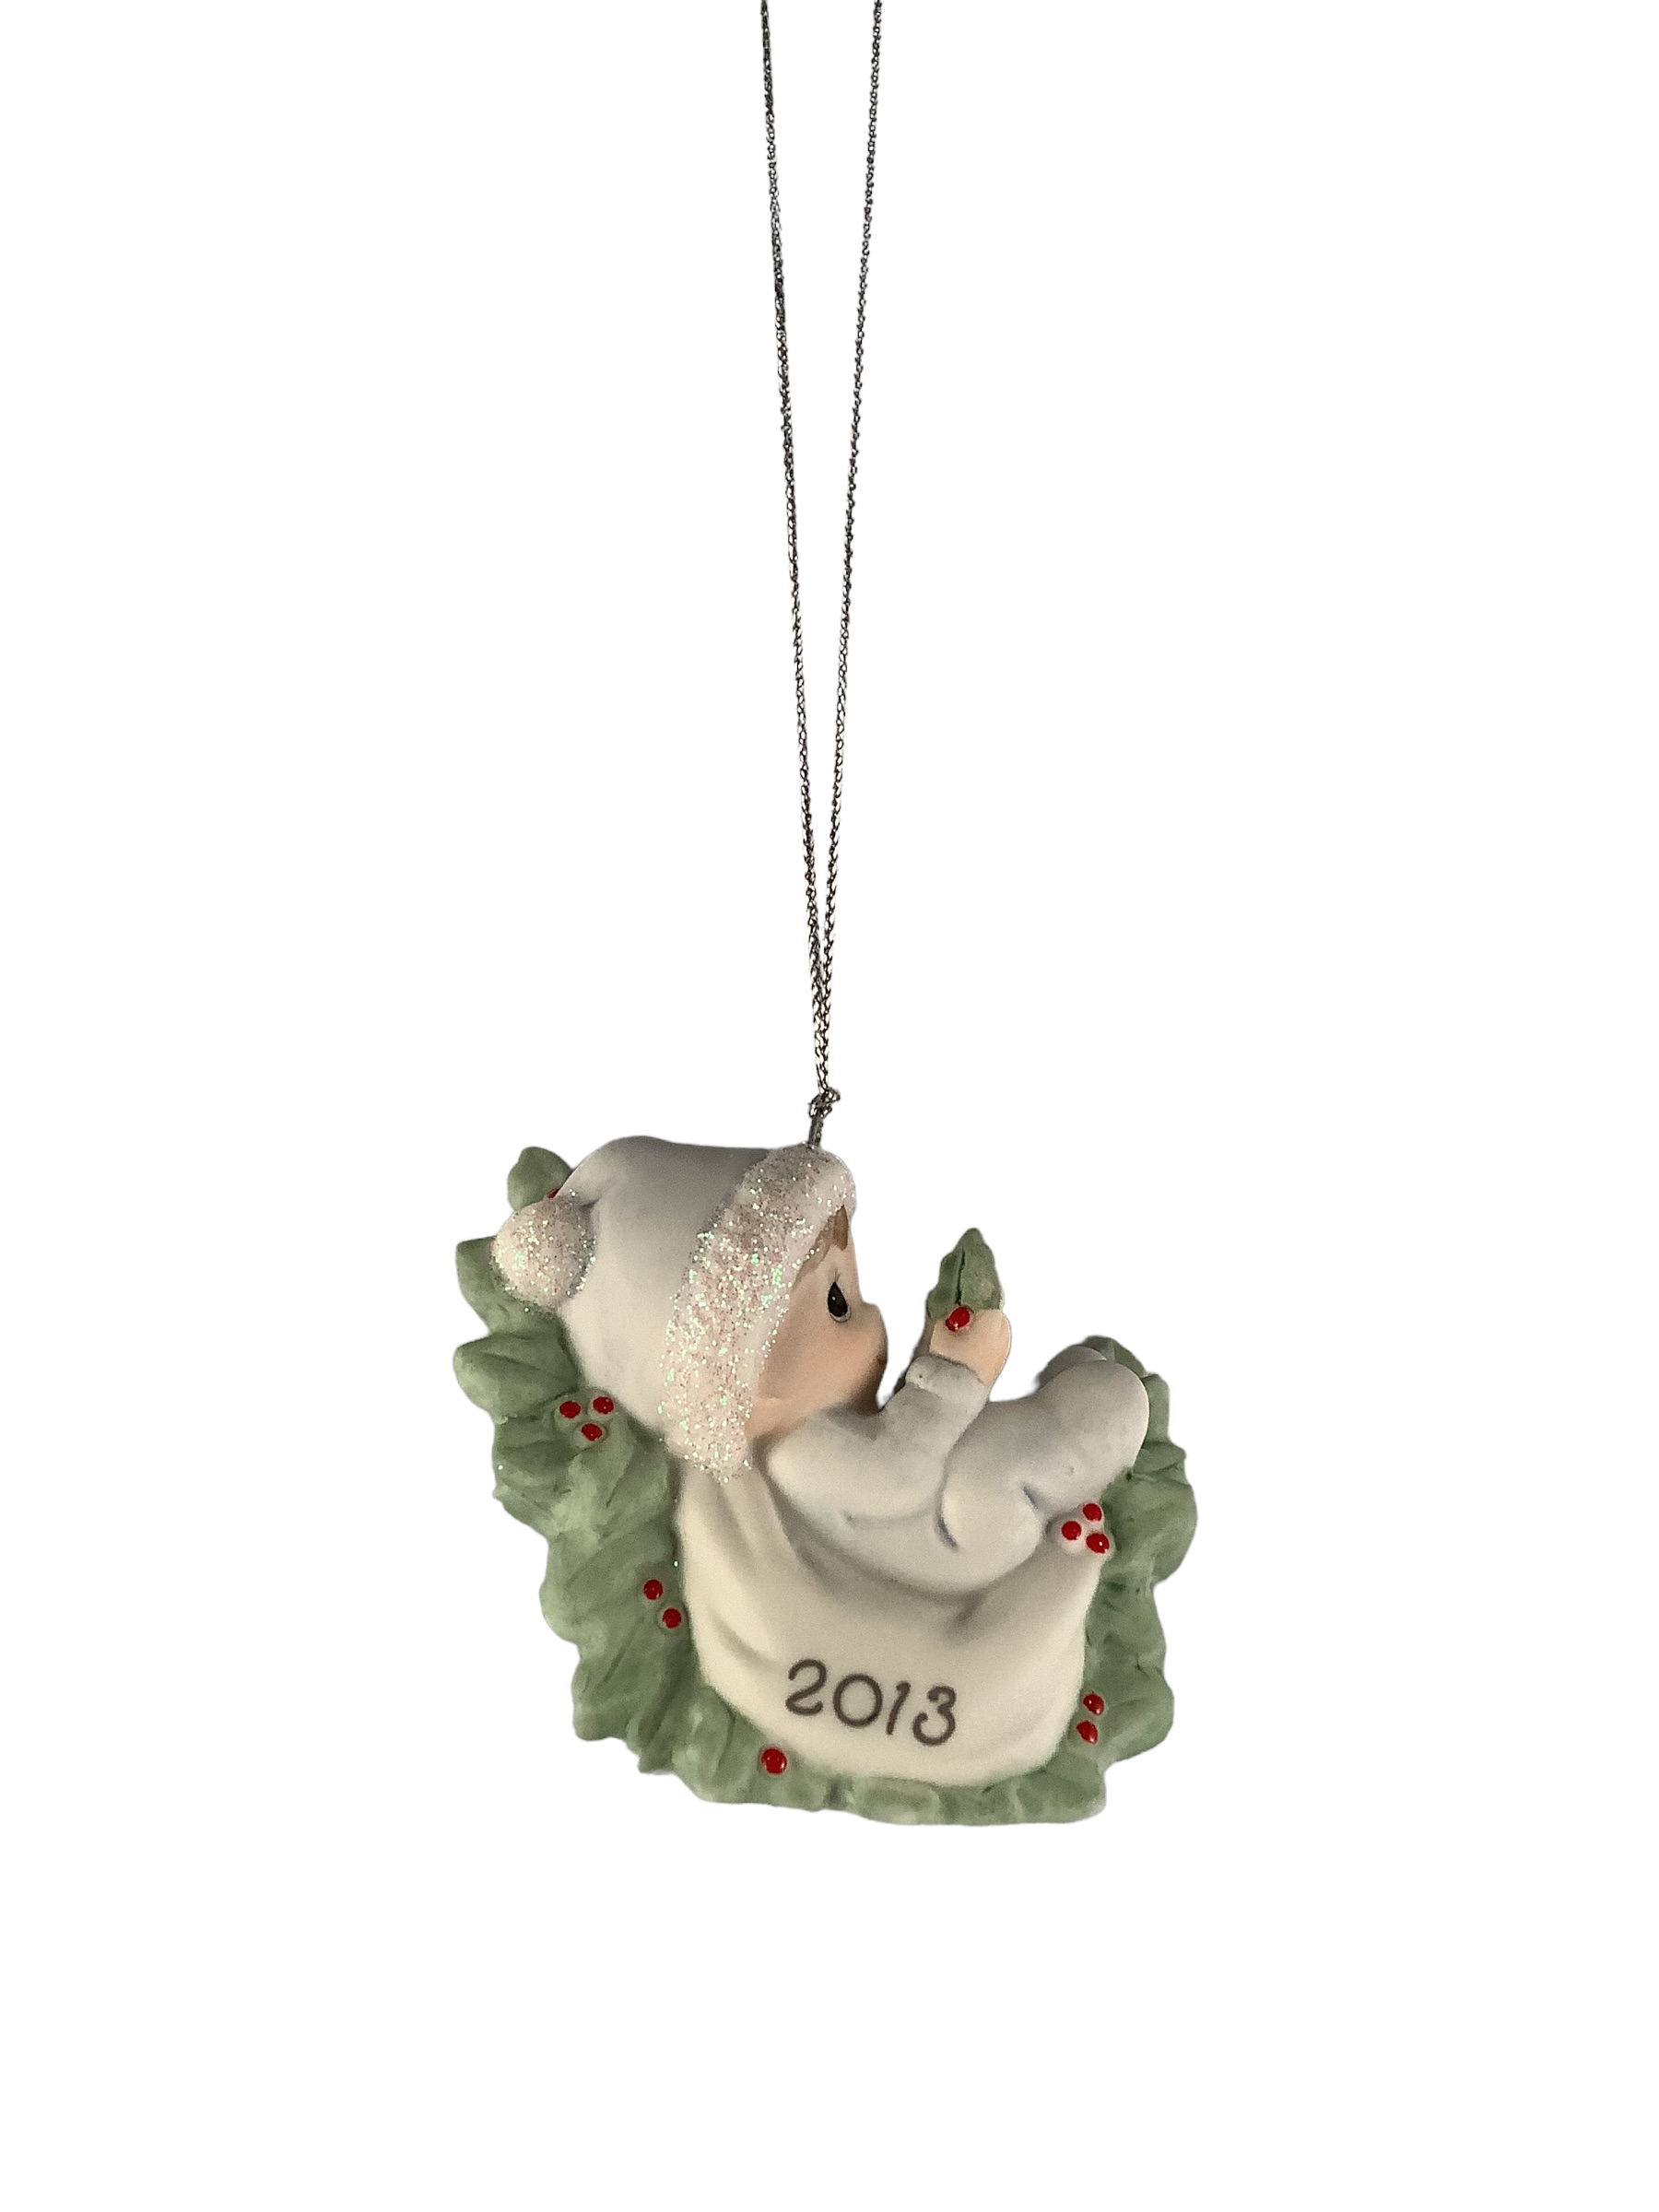 Baby's First Christmas 2013 (Boy) - Precious Moment Ornament